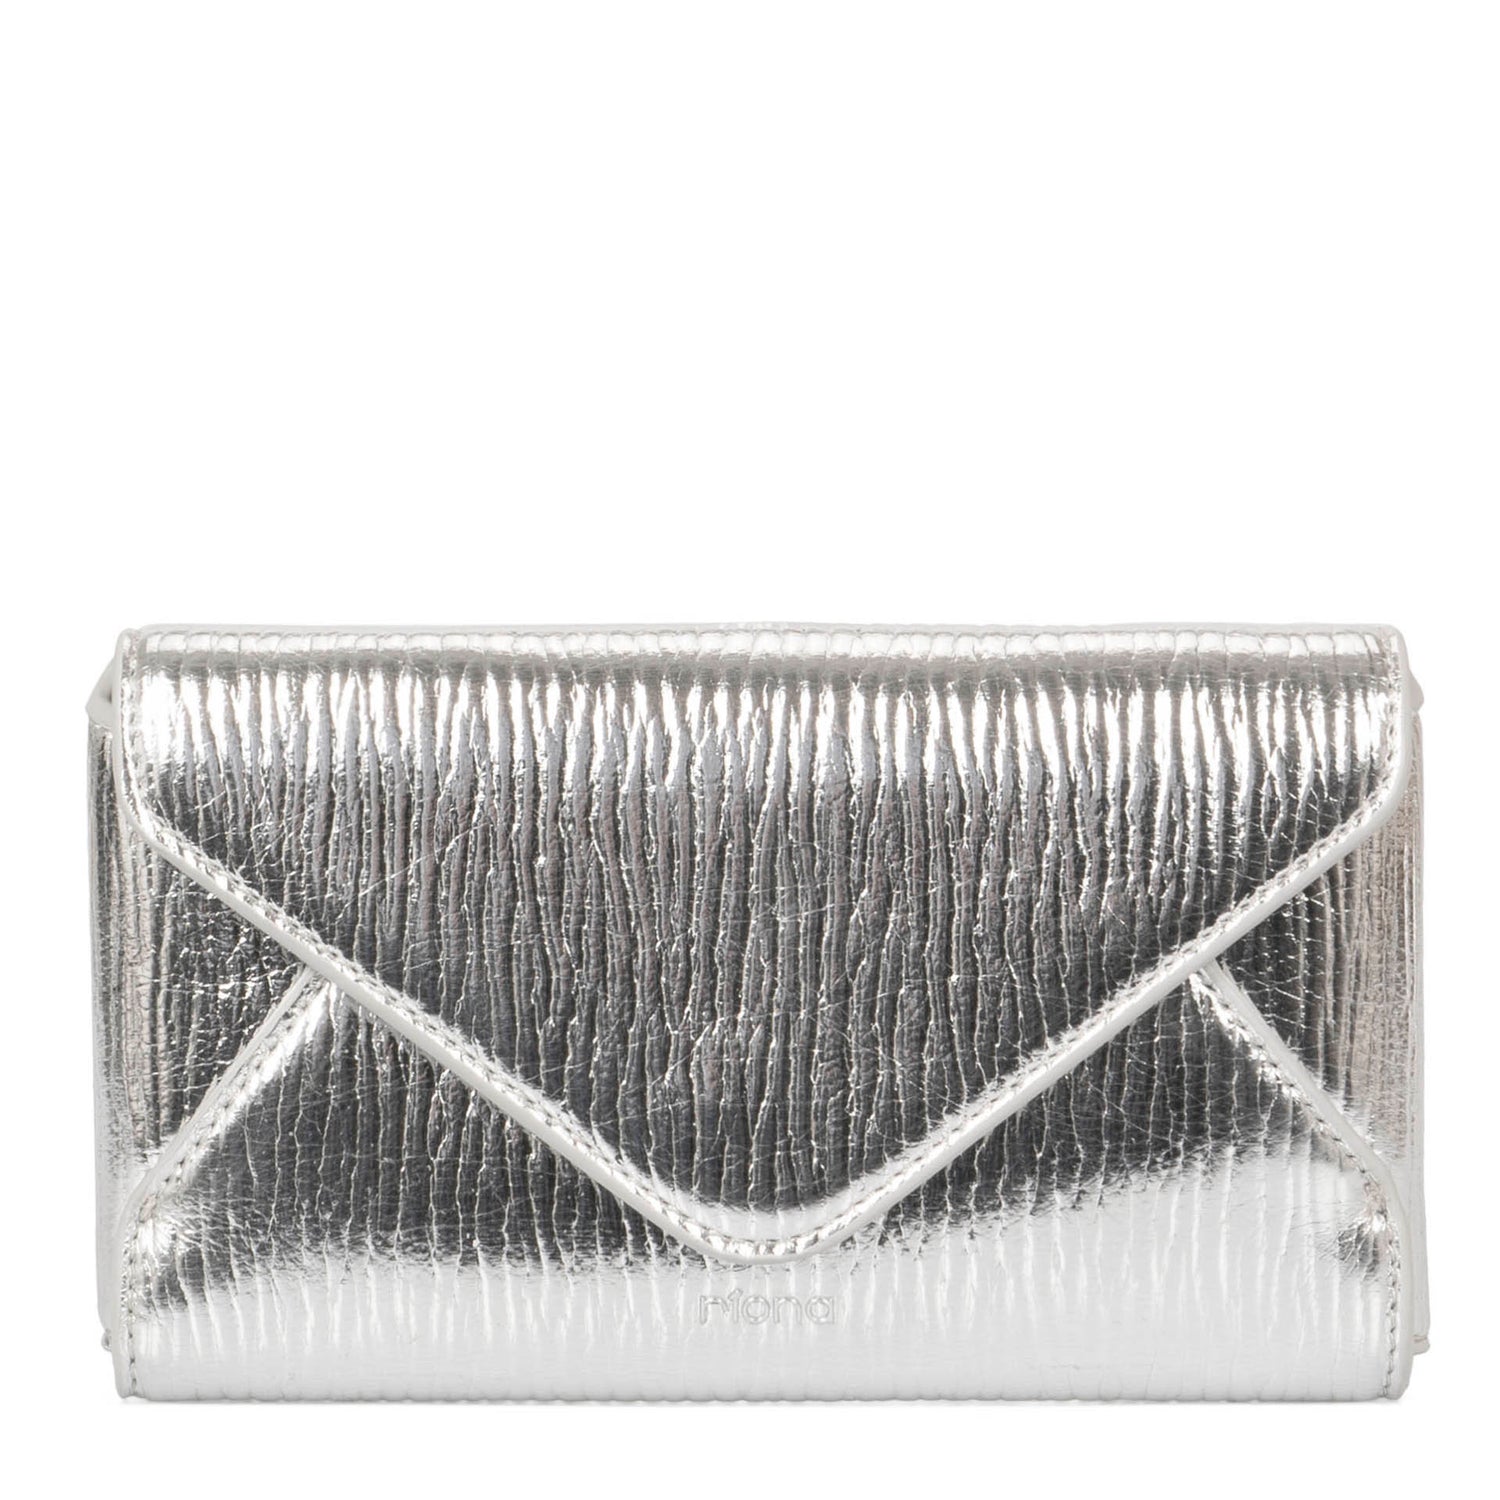 Front view of silver metallic-lustered vegan crossbody bag called Evening in an envelopy style designed by Riona, showcasing its enevelopye closure and shiney textured PU look.